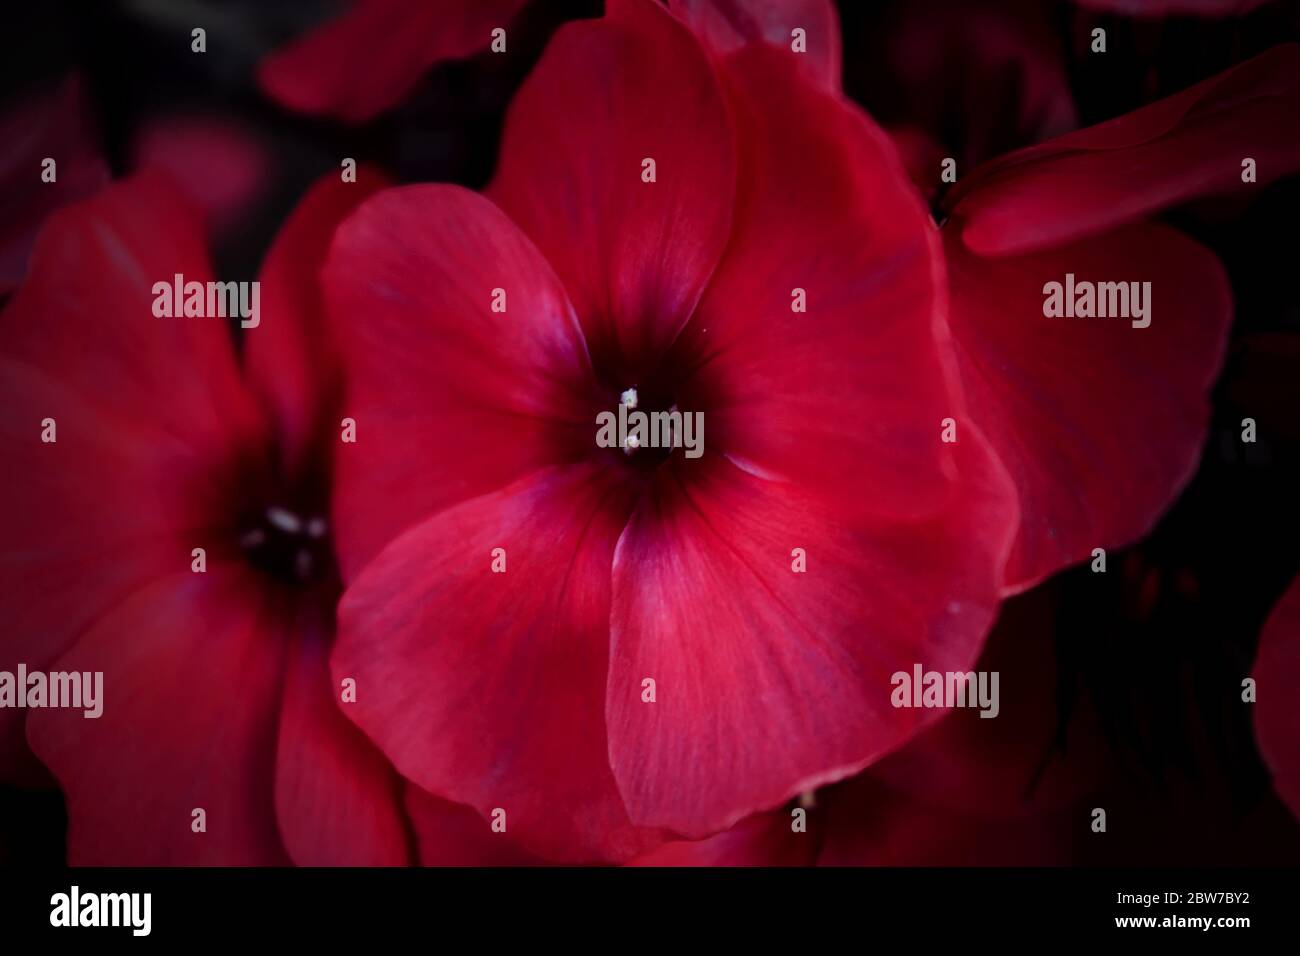 Blooming phlo. Phlox paniculata, fall phlox, garden, perennial or summer phlox. Bright red flowers close-up on a dark backgroundColor outdoor floral m Stock Photo